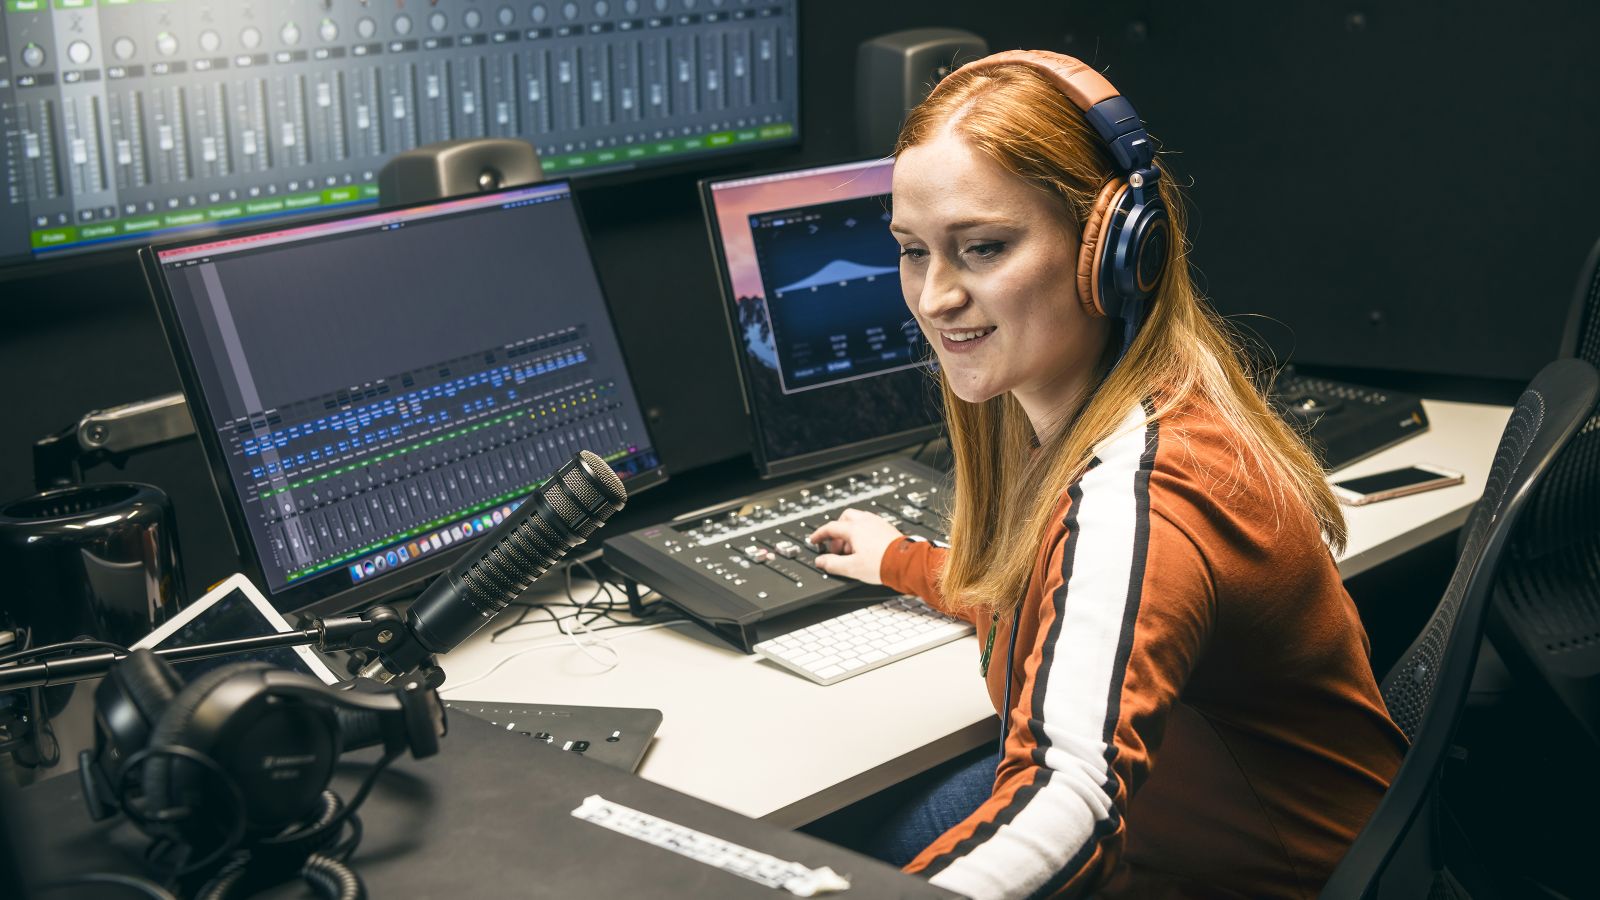 A female student with long red hair wears headphones while operating equipment in a recording studio.